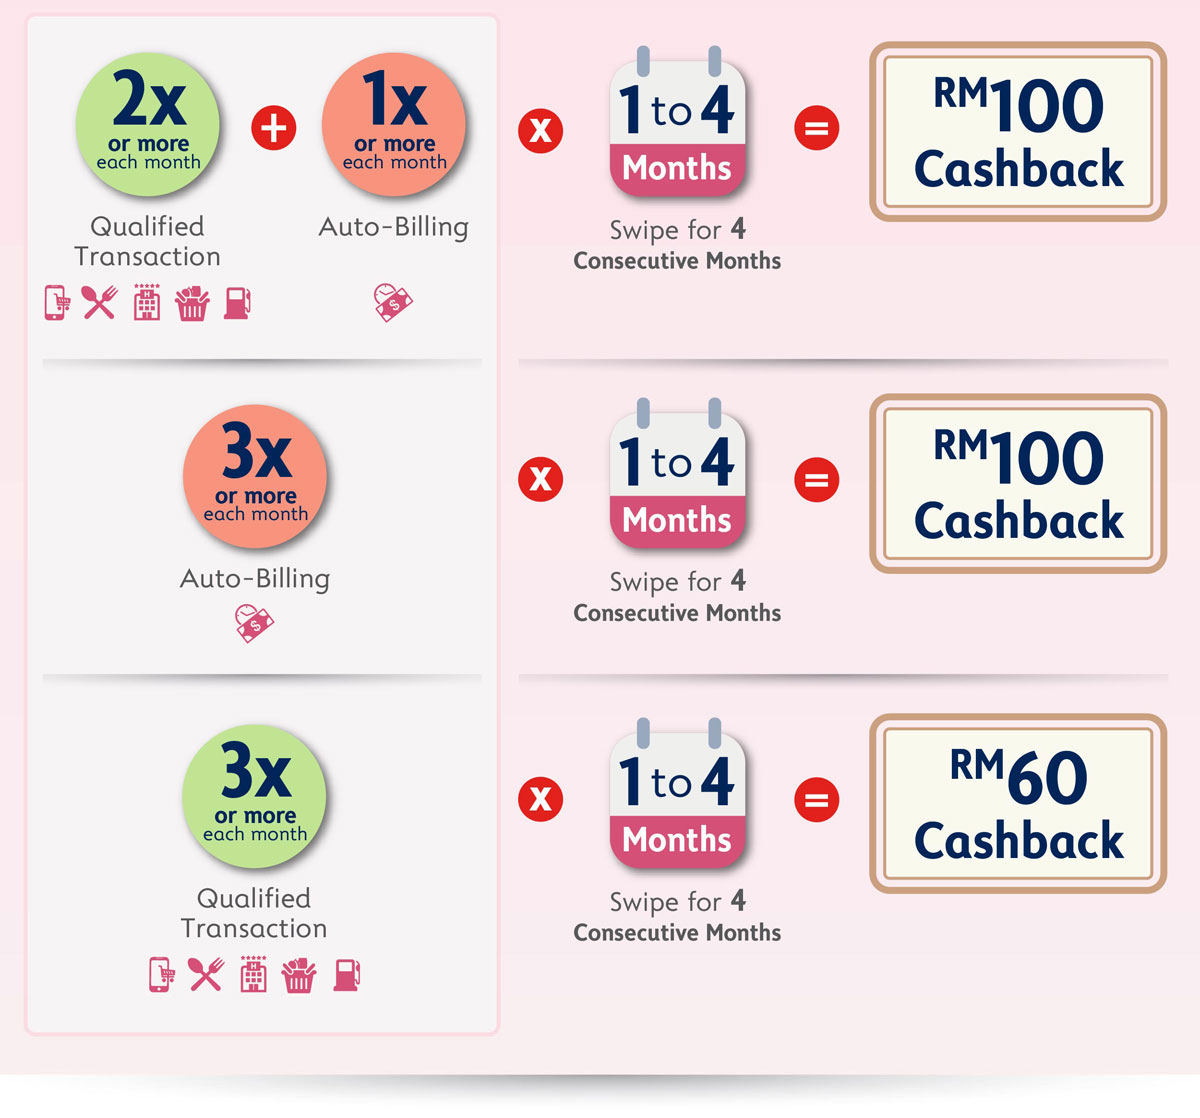 Scenarios to be Eligible to Get up to RM100 Cashback, You Must Perform: